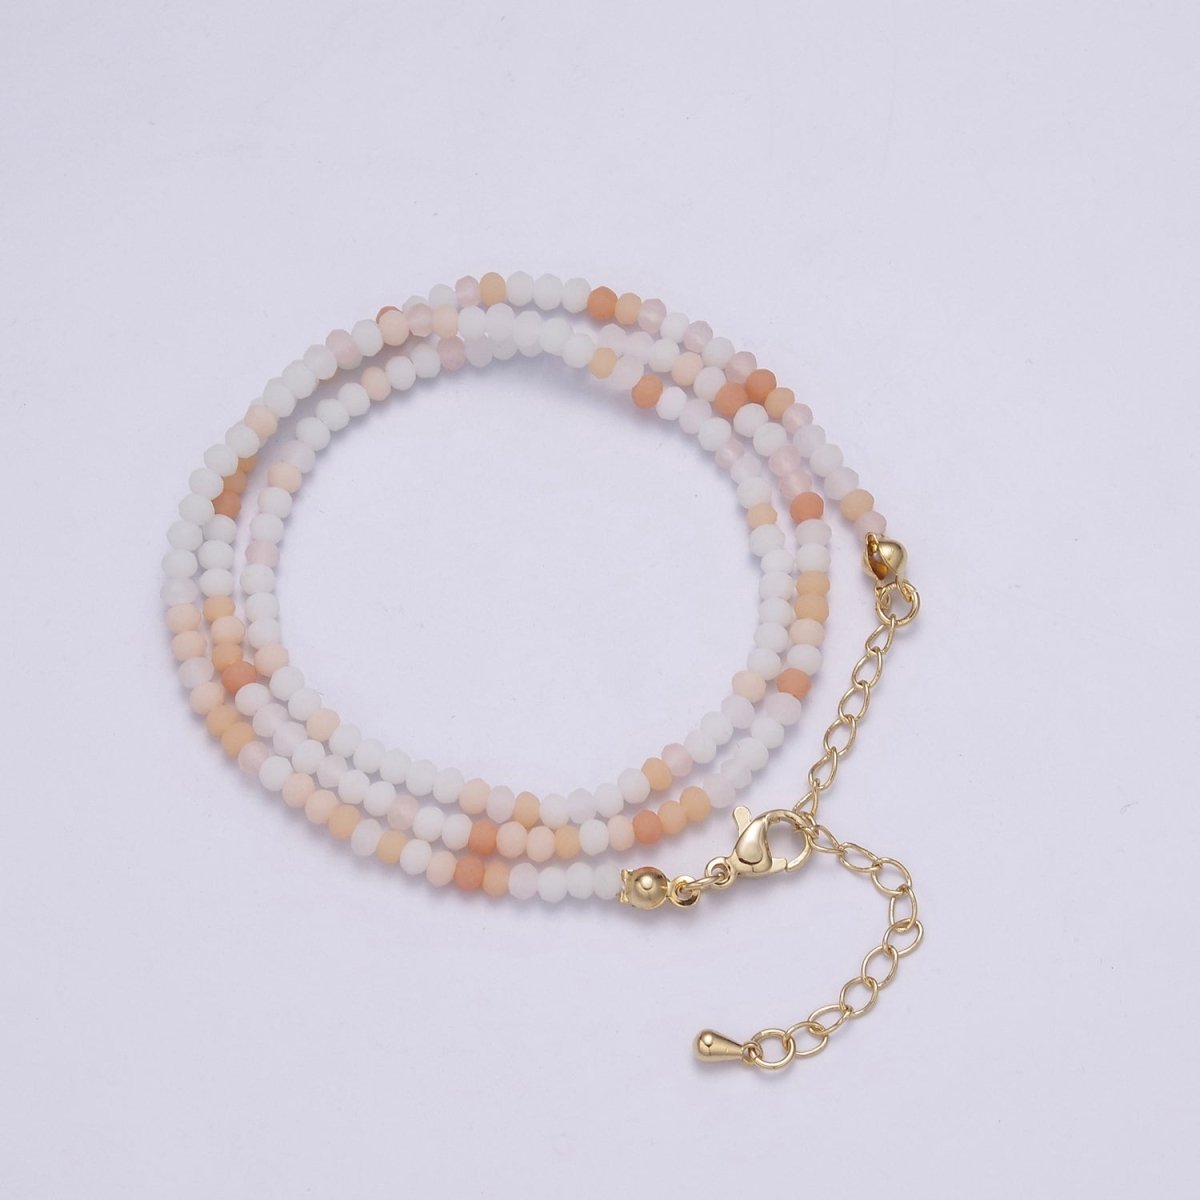 Dainty Peach Beads Necklace 3mm Micro Faceted Round Beads Necklace, Tiny Bead Necklace, Women's Necklace | WA-453 Clearance Pricing - DLUXCA